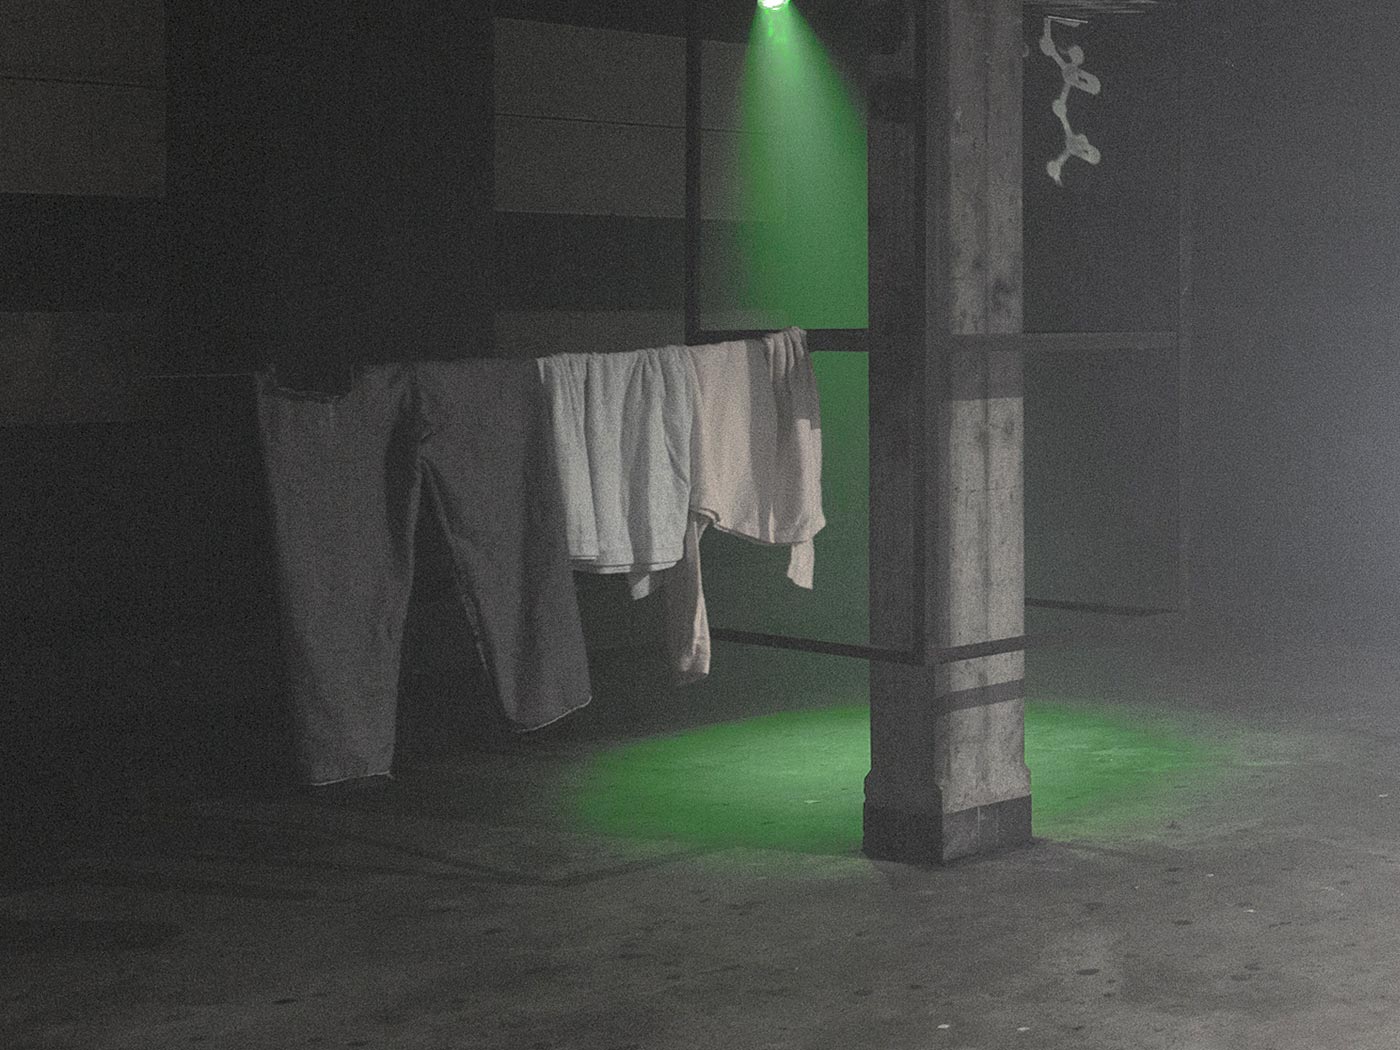 Three items of clothing hang on a steel cable to dry, with a green spotlight and a cut molecular structure in the background.